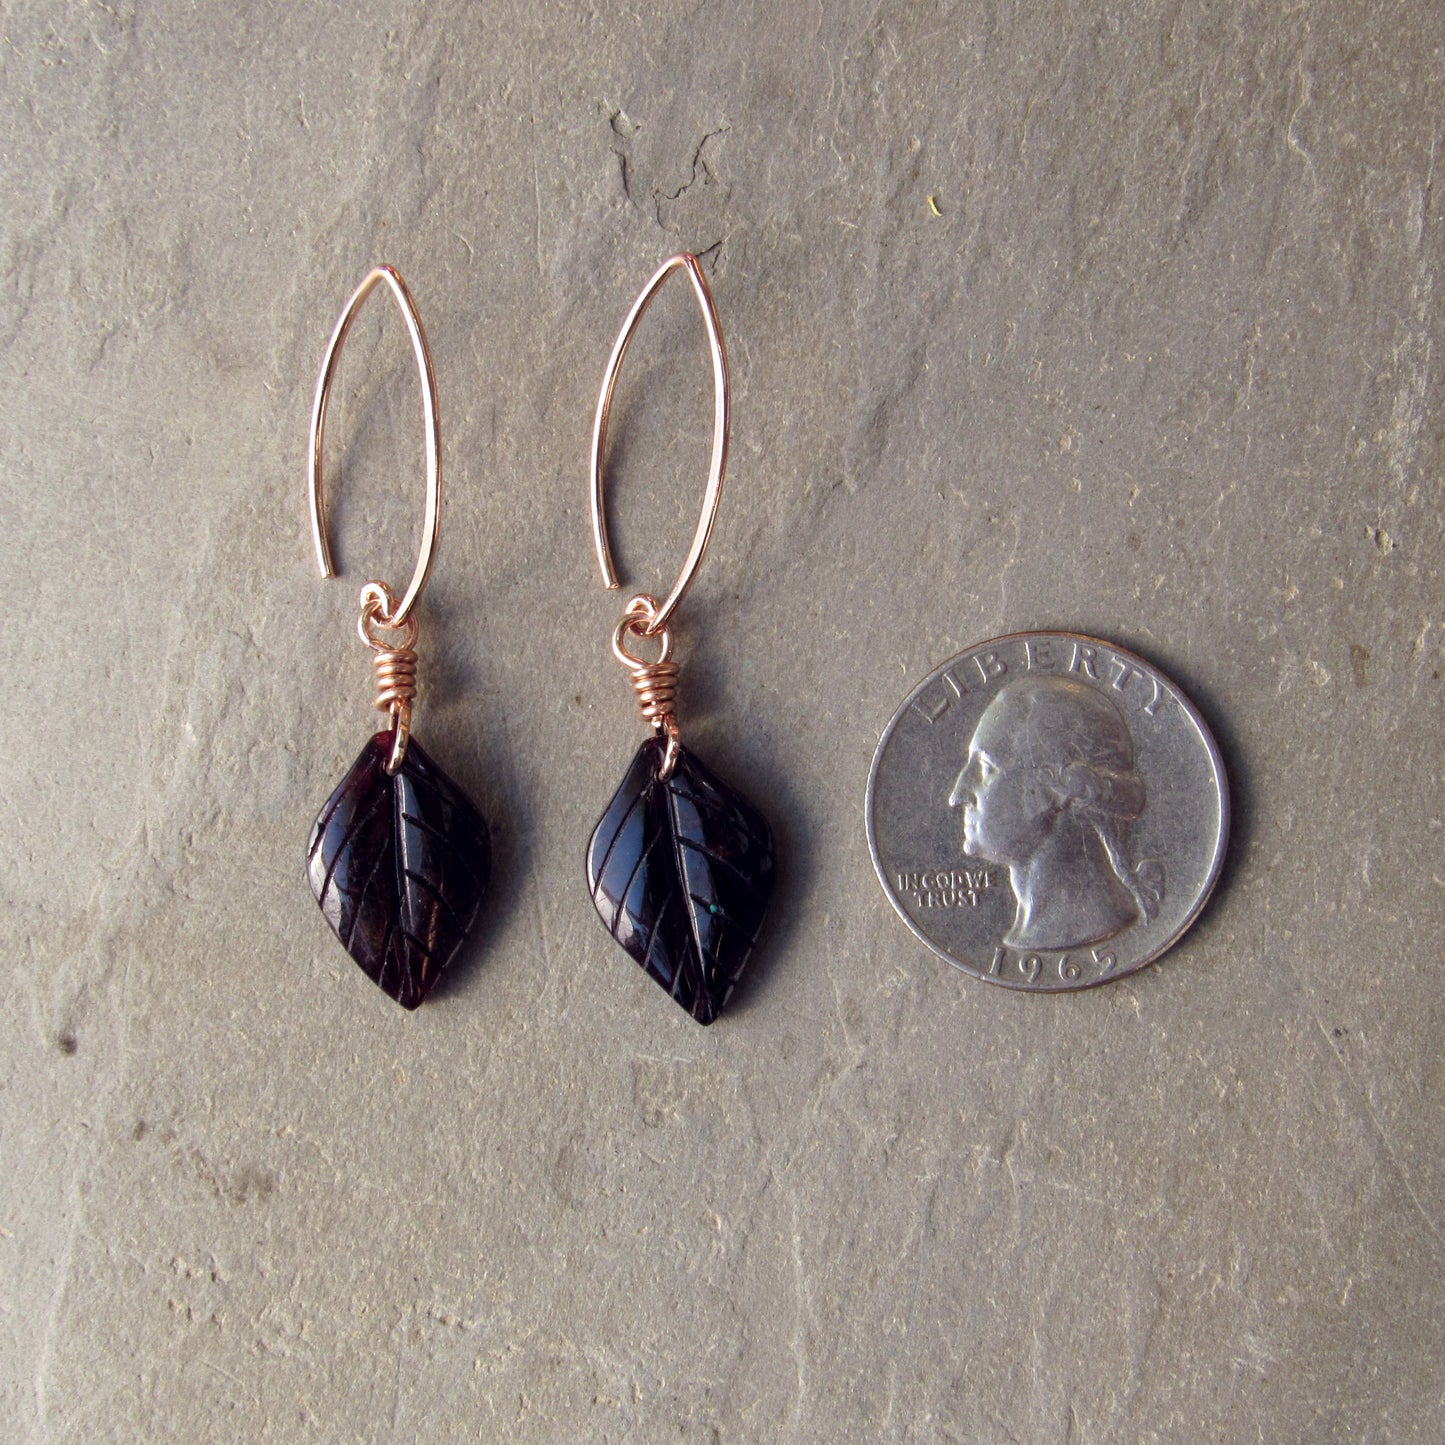 Genuine Garnet Leaf Carved Earrings Hand Wrapped with Silver Vermeil Wire